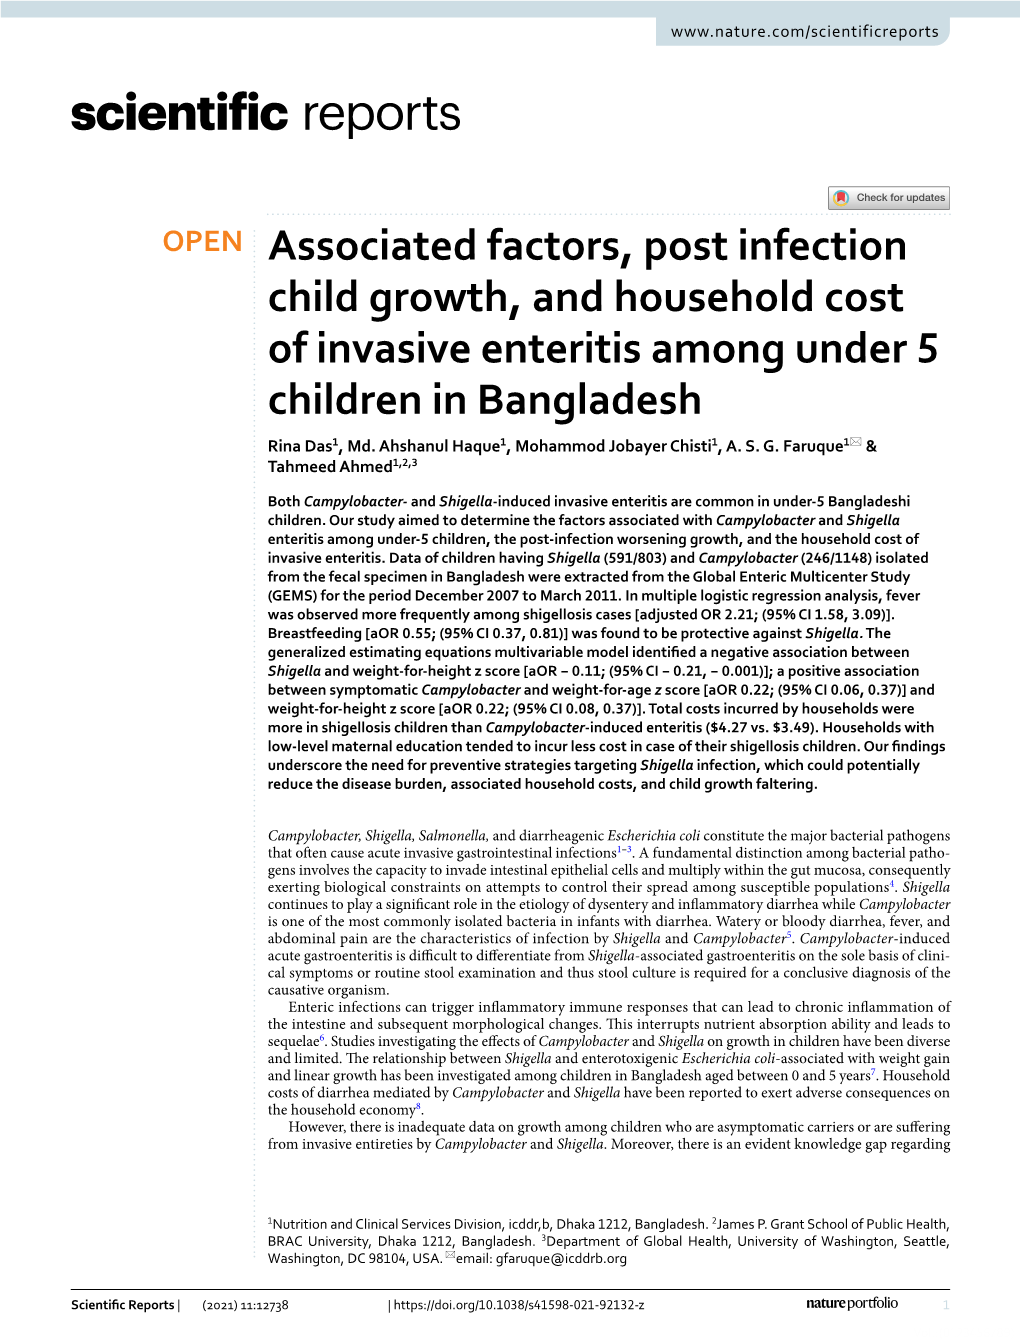 Associated Factors, Post Infection Child Growth, and Household Cost of Invasive Enteritis Among Under 5 Children in Bangladesh Rina Das1, Md